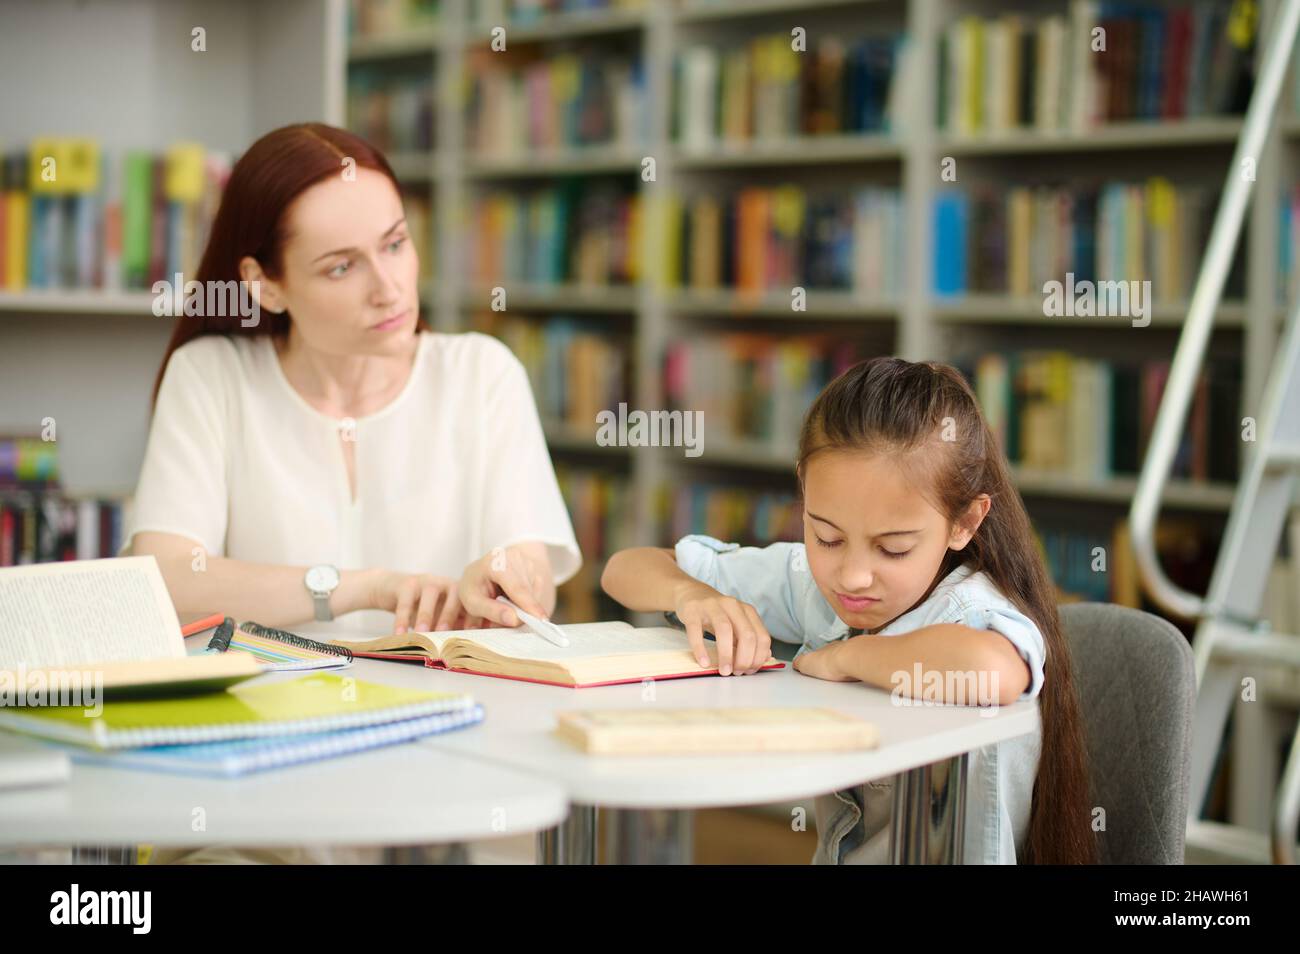 Woman looking at girl refusing to study Stock Photo